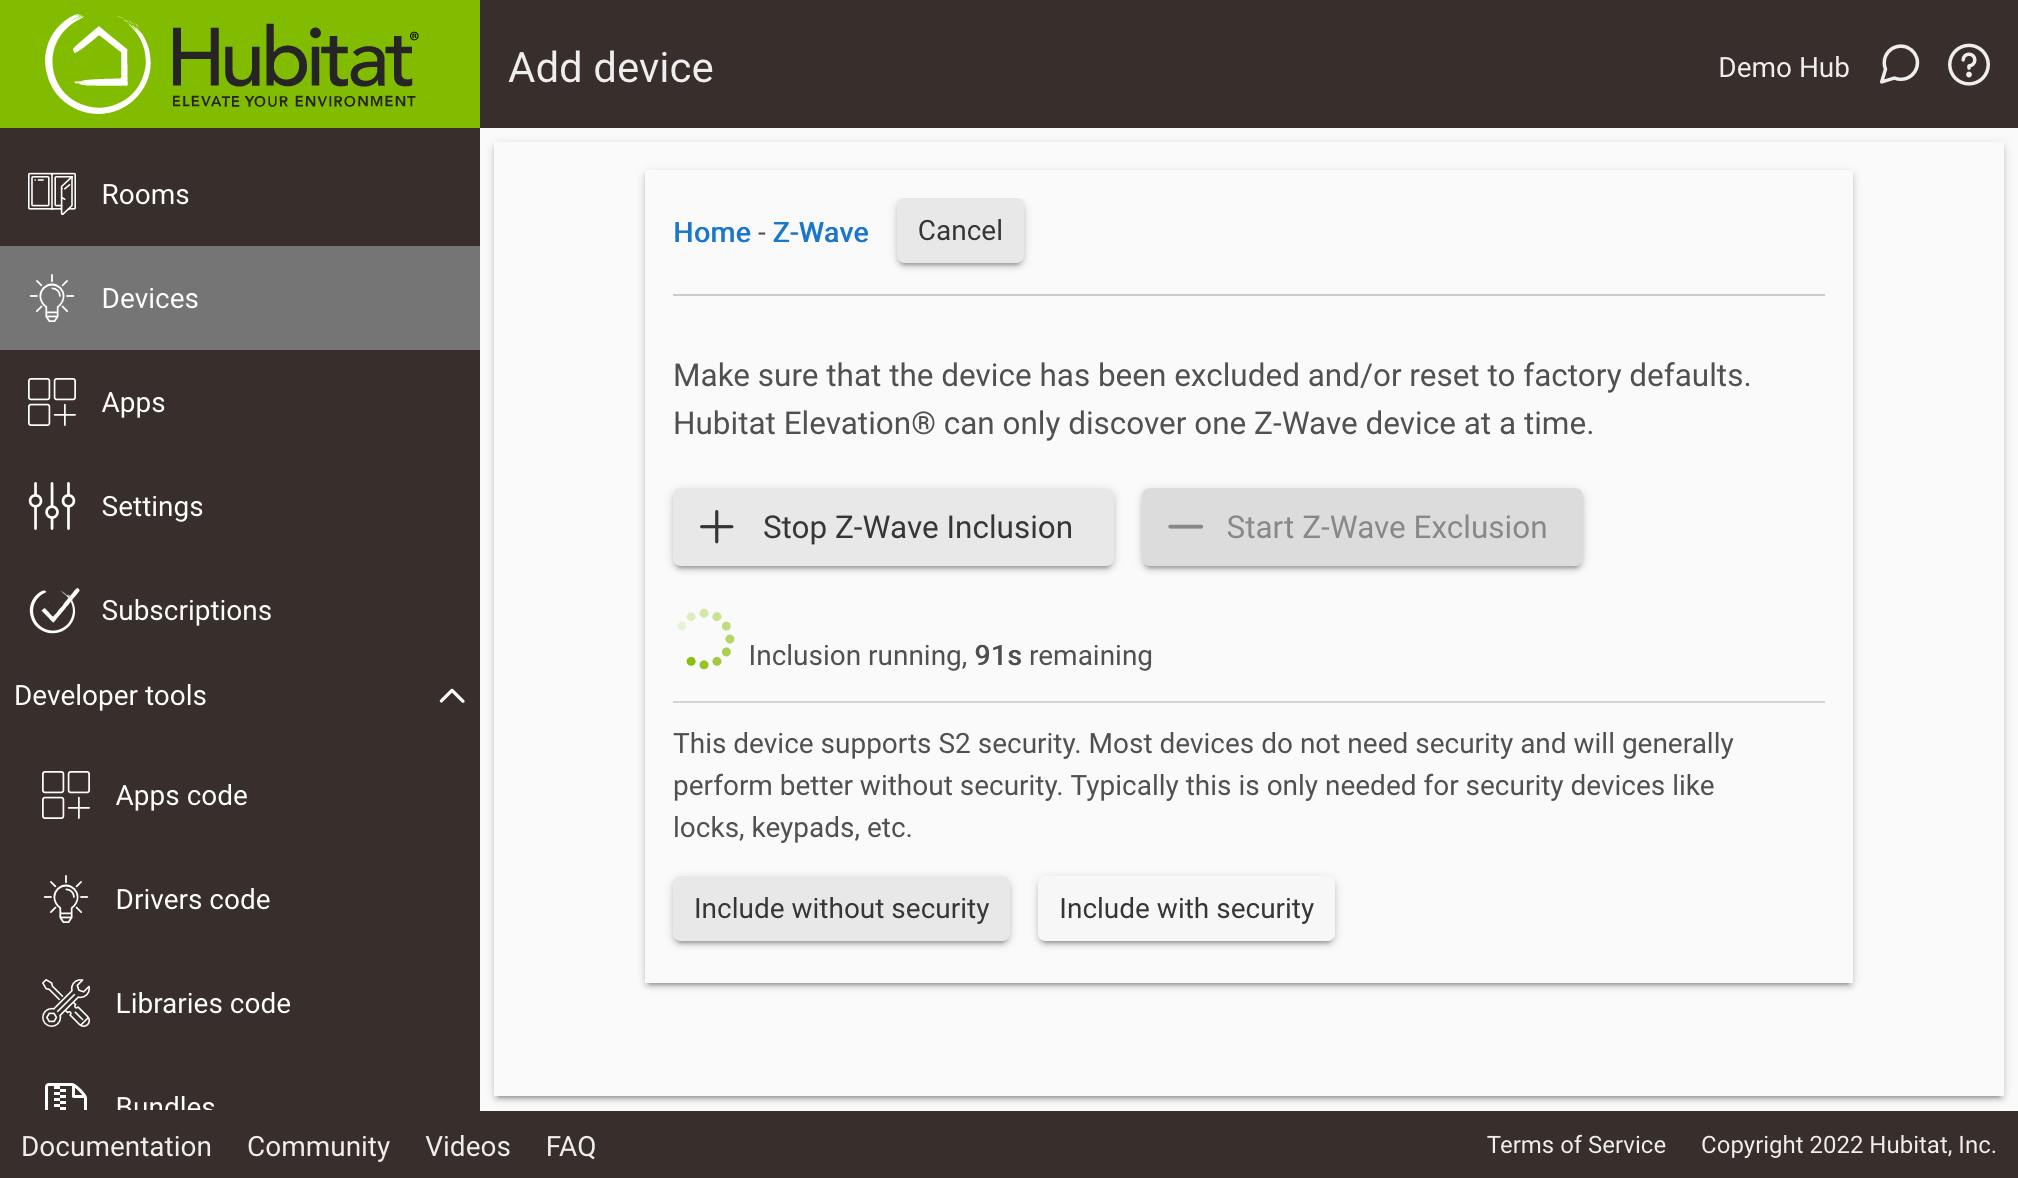  Screenshot: "This device supports S2 security....," with options "Include without security" or "Include with security"